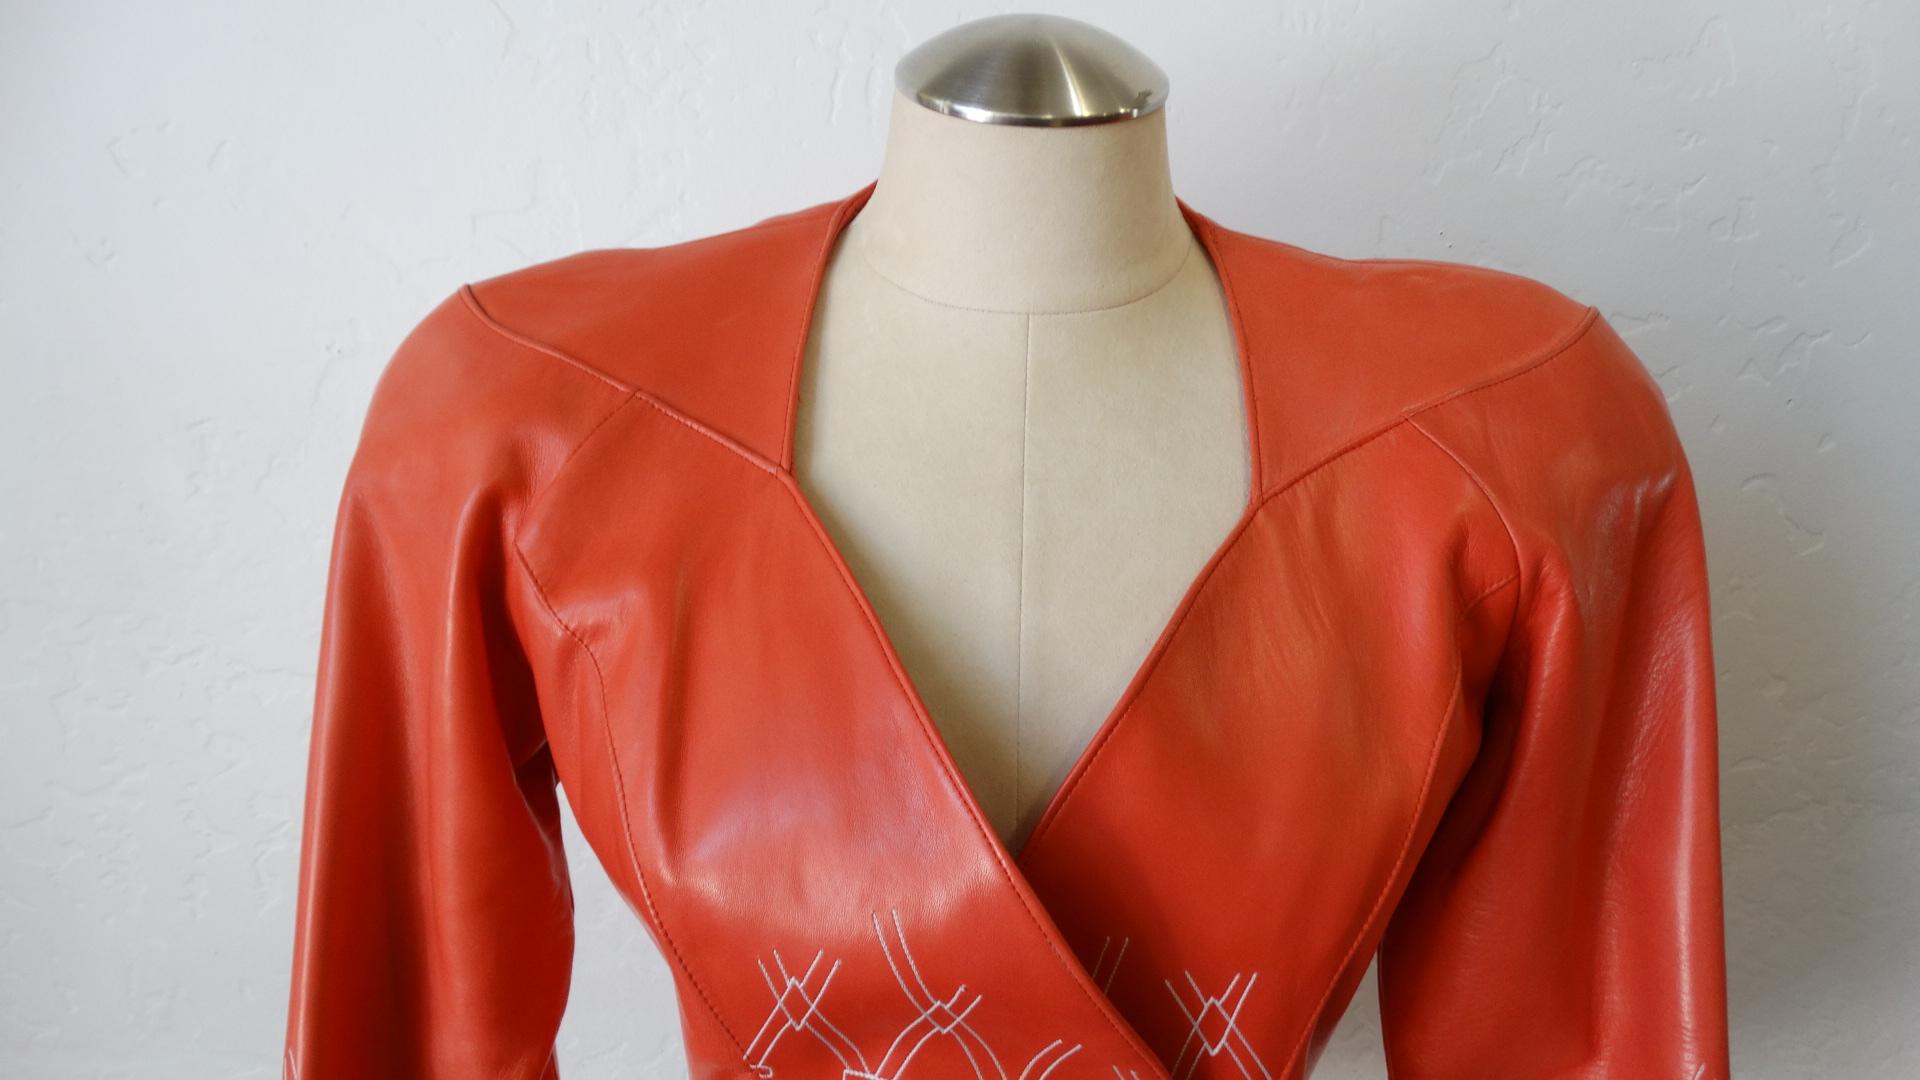 Feel All Of The 80s Vibes In This Leather Jacket! Circa 1980s, this Jean Claude Jitrois peach leather wrap jacket features strong shoulders, a sweetheart neck and a contrasting white stitched diamond pattern on the bottom half. Jacket wraps and